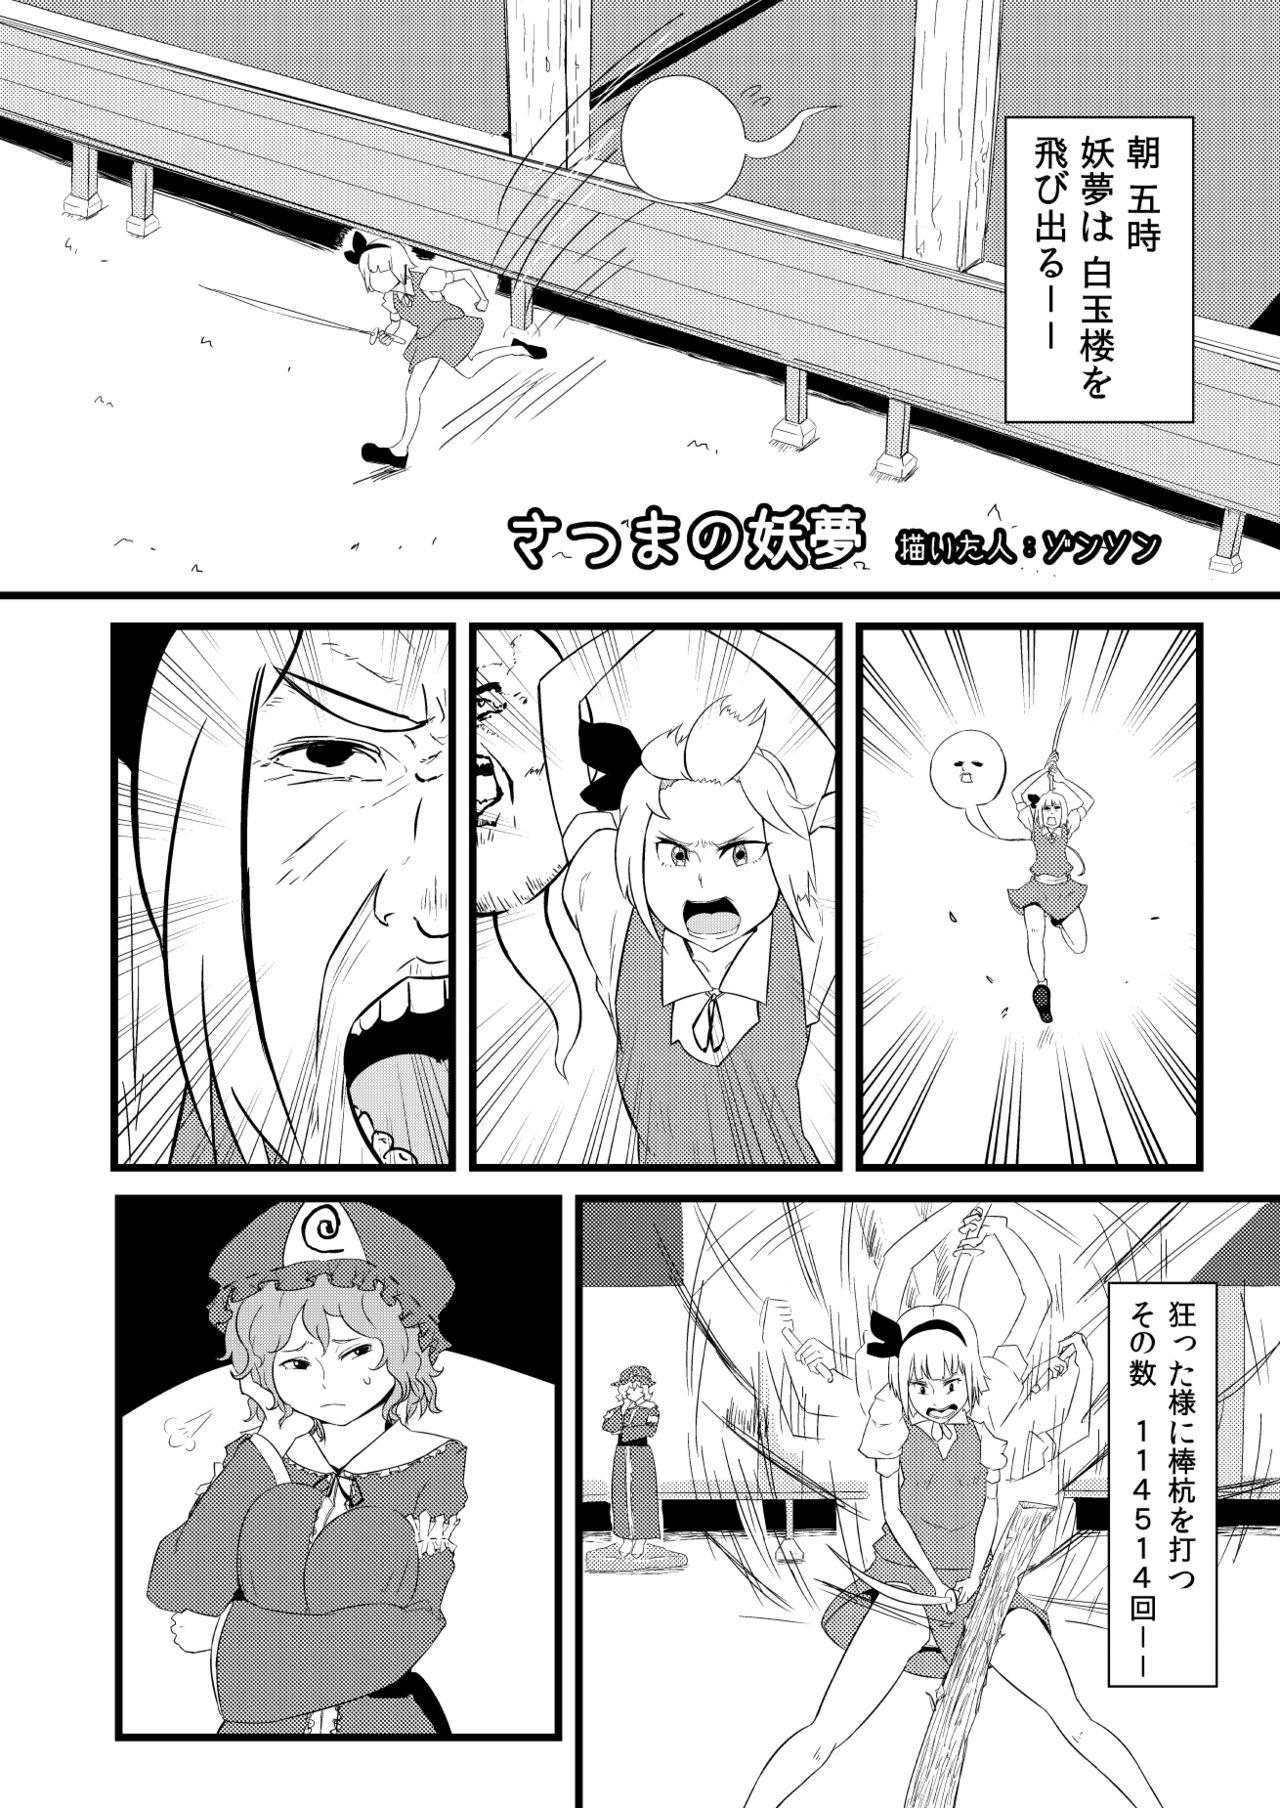 Outdoor 東方板としあき合同誌5 - Touhou project Cocks - Page 1